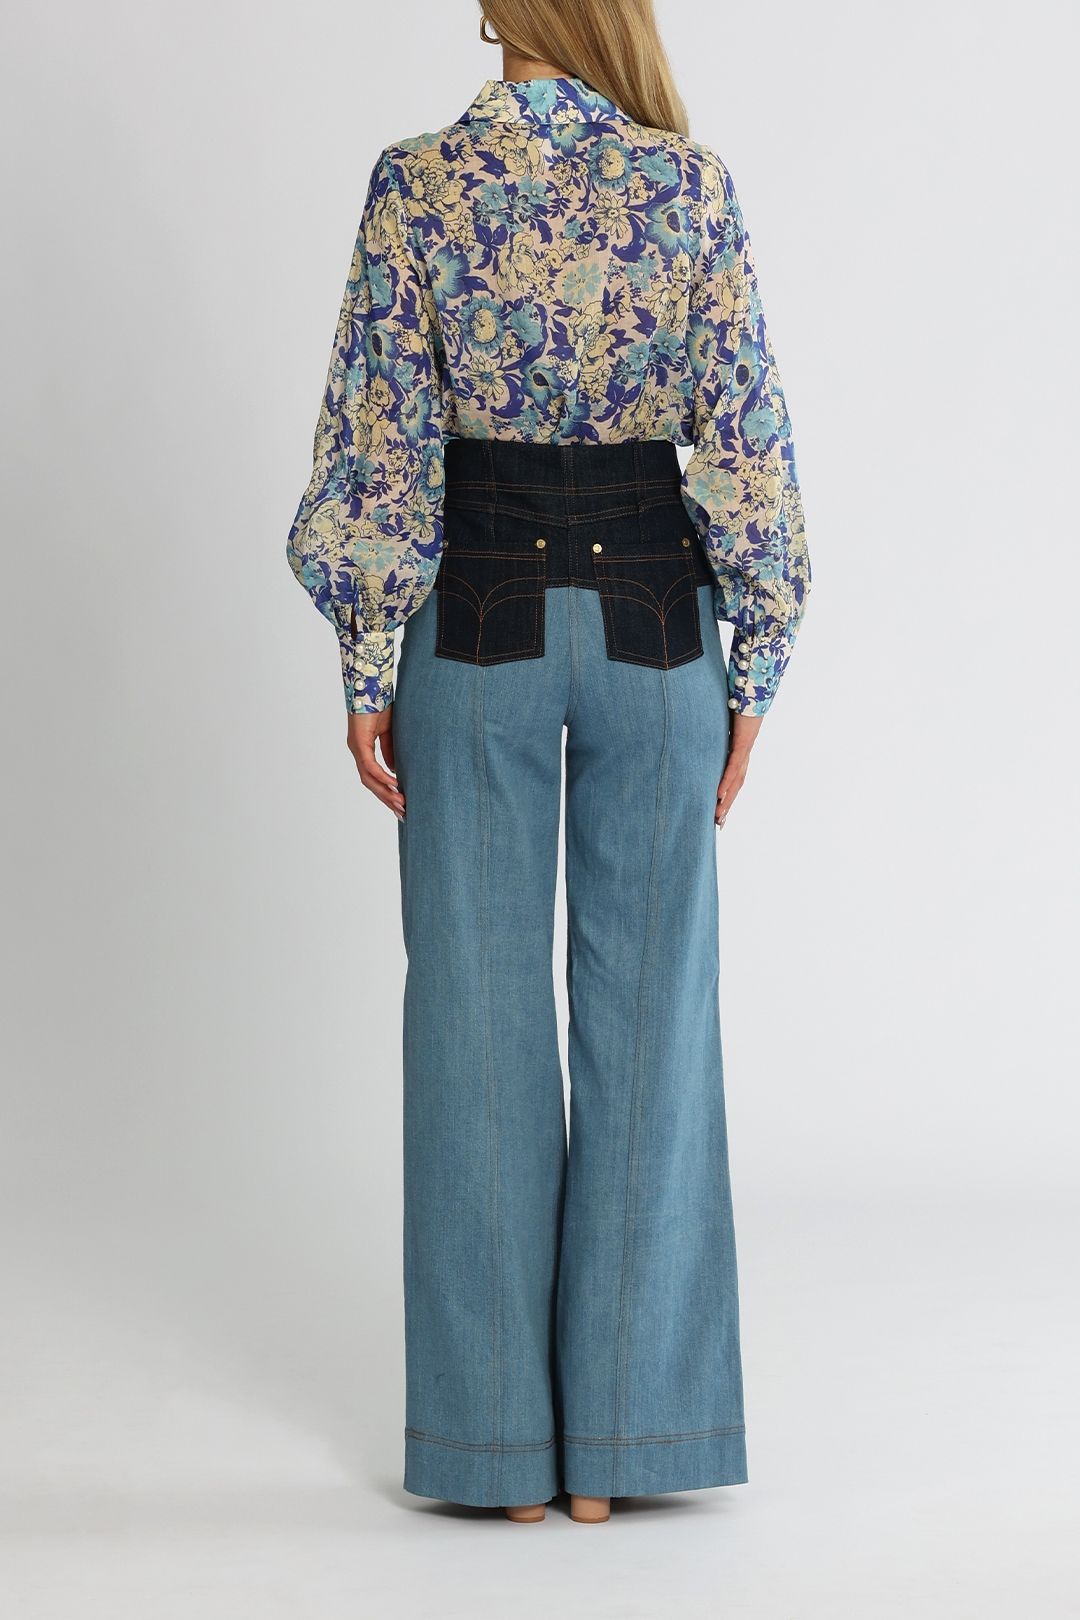 Alice McCall Frida Shirt Sapphire Relaxed Fit